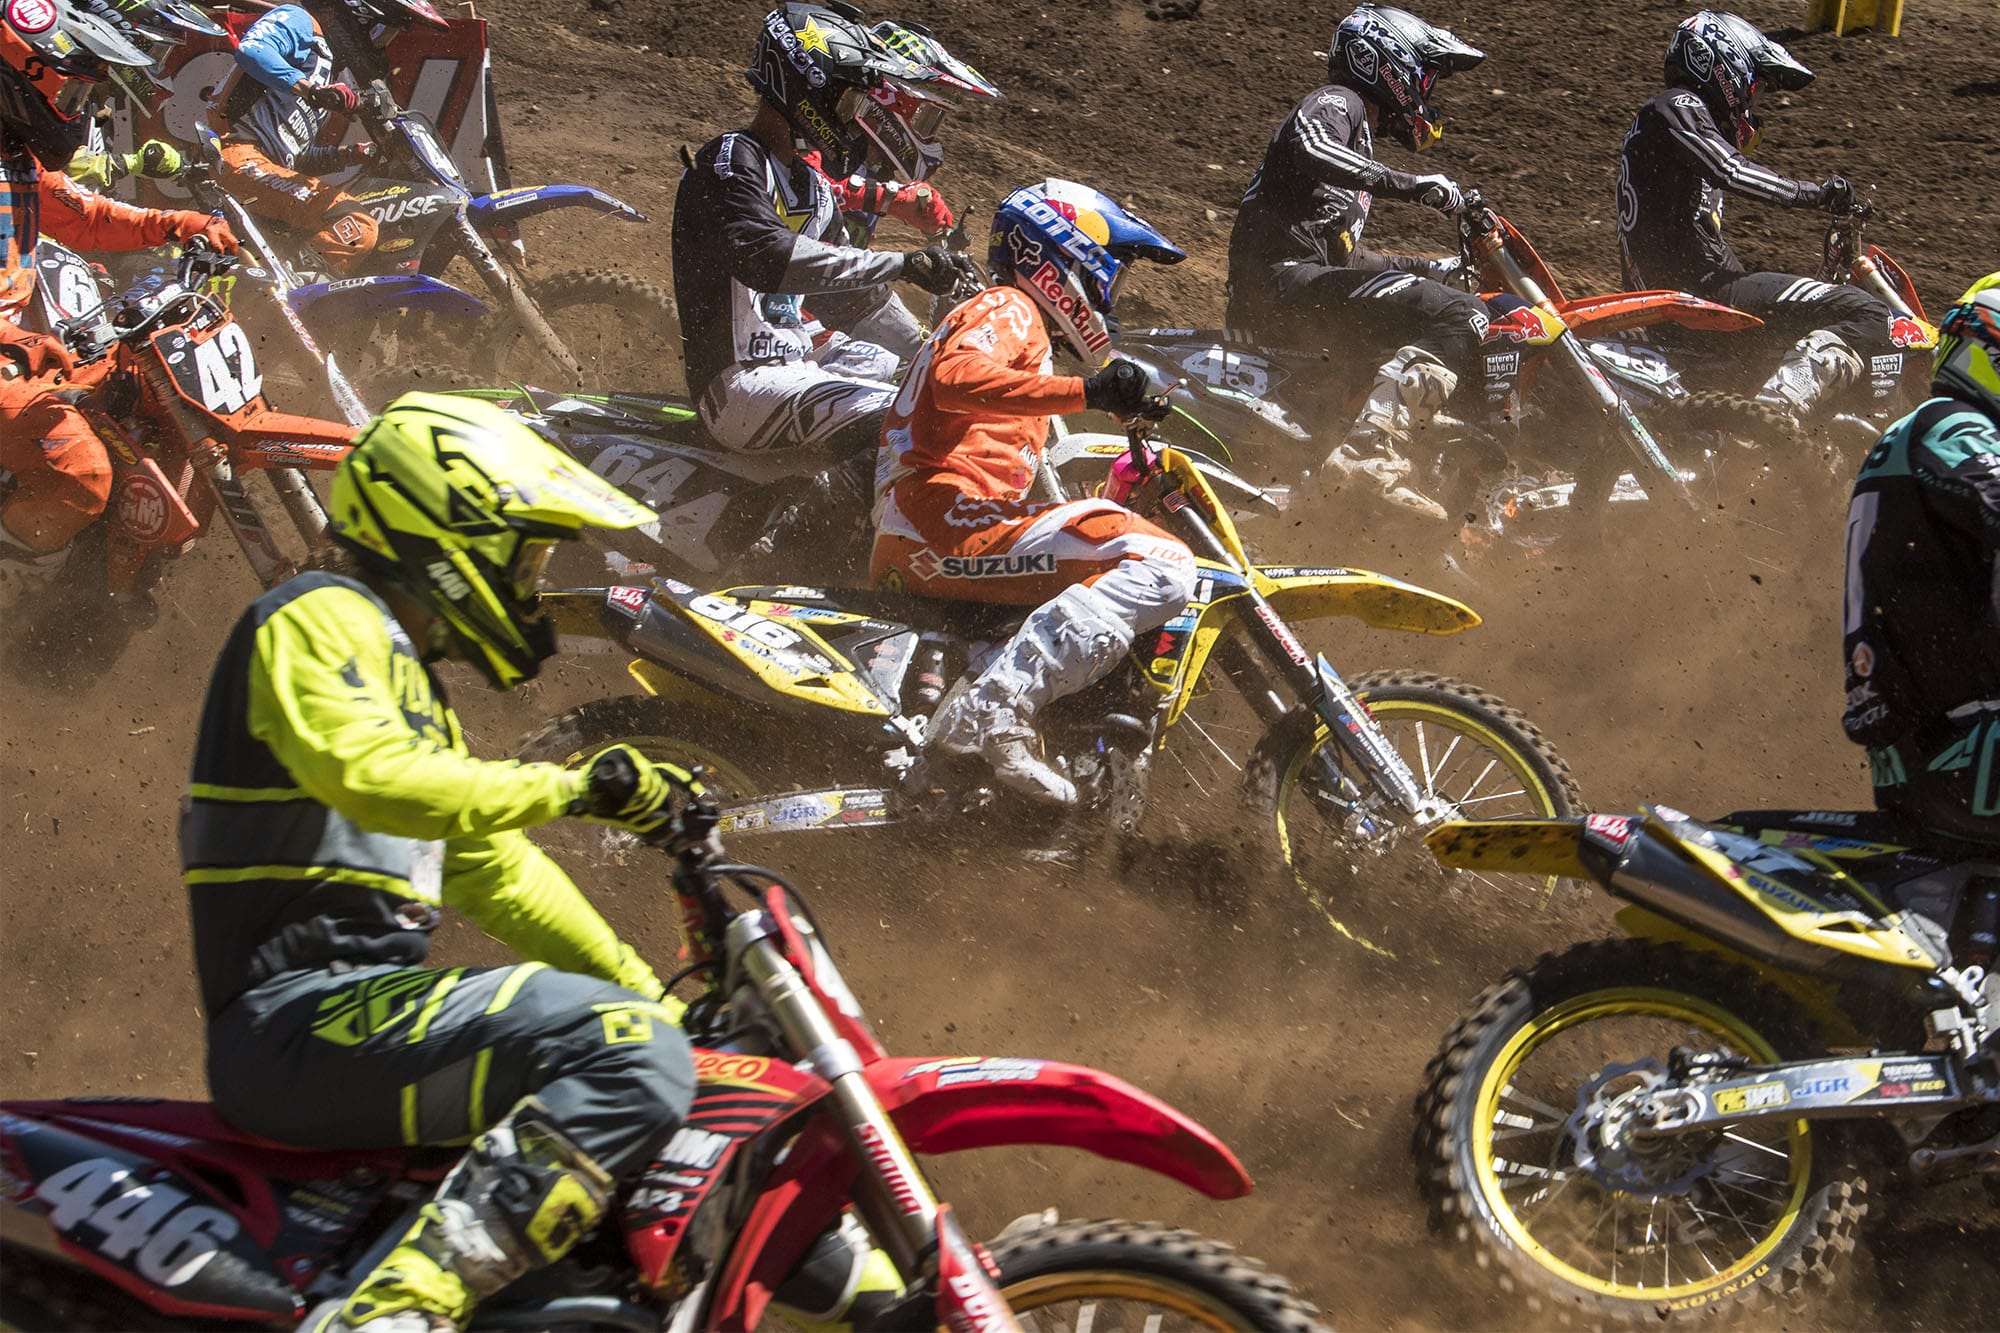 Riders fight for position at the start of the 250 Class Moto #2 at the Washougal National Lucas Oil Pro Motocross at the Washougal MX Park on Saturday afternoon, July 28, 2018.